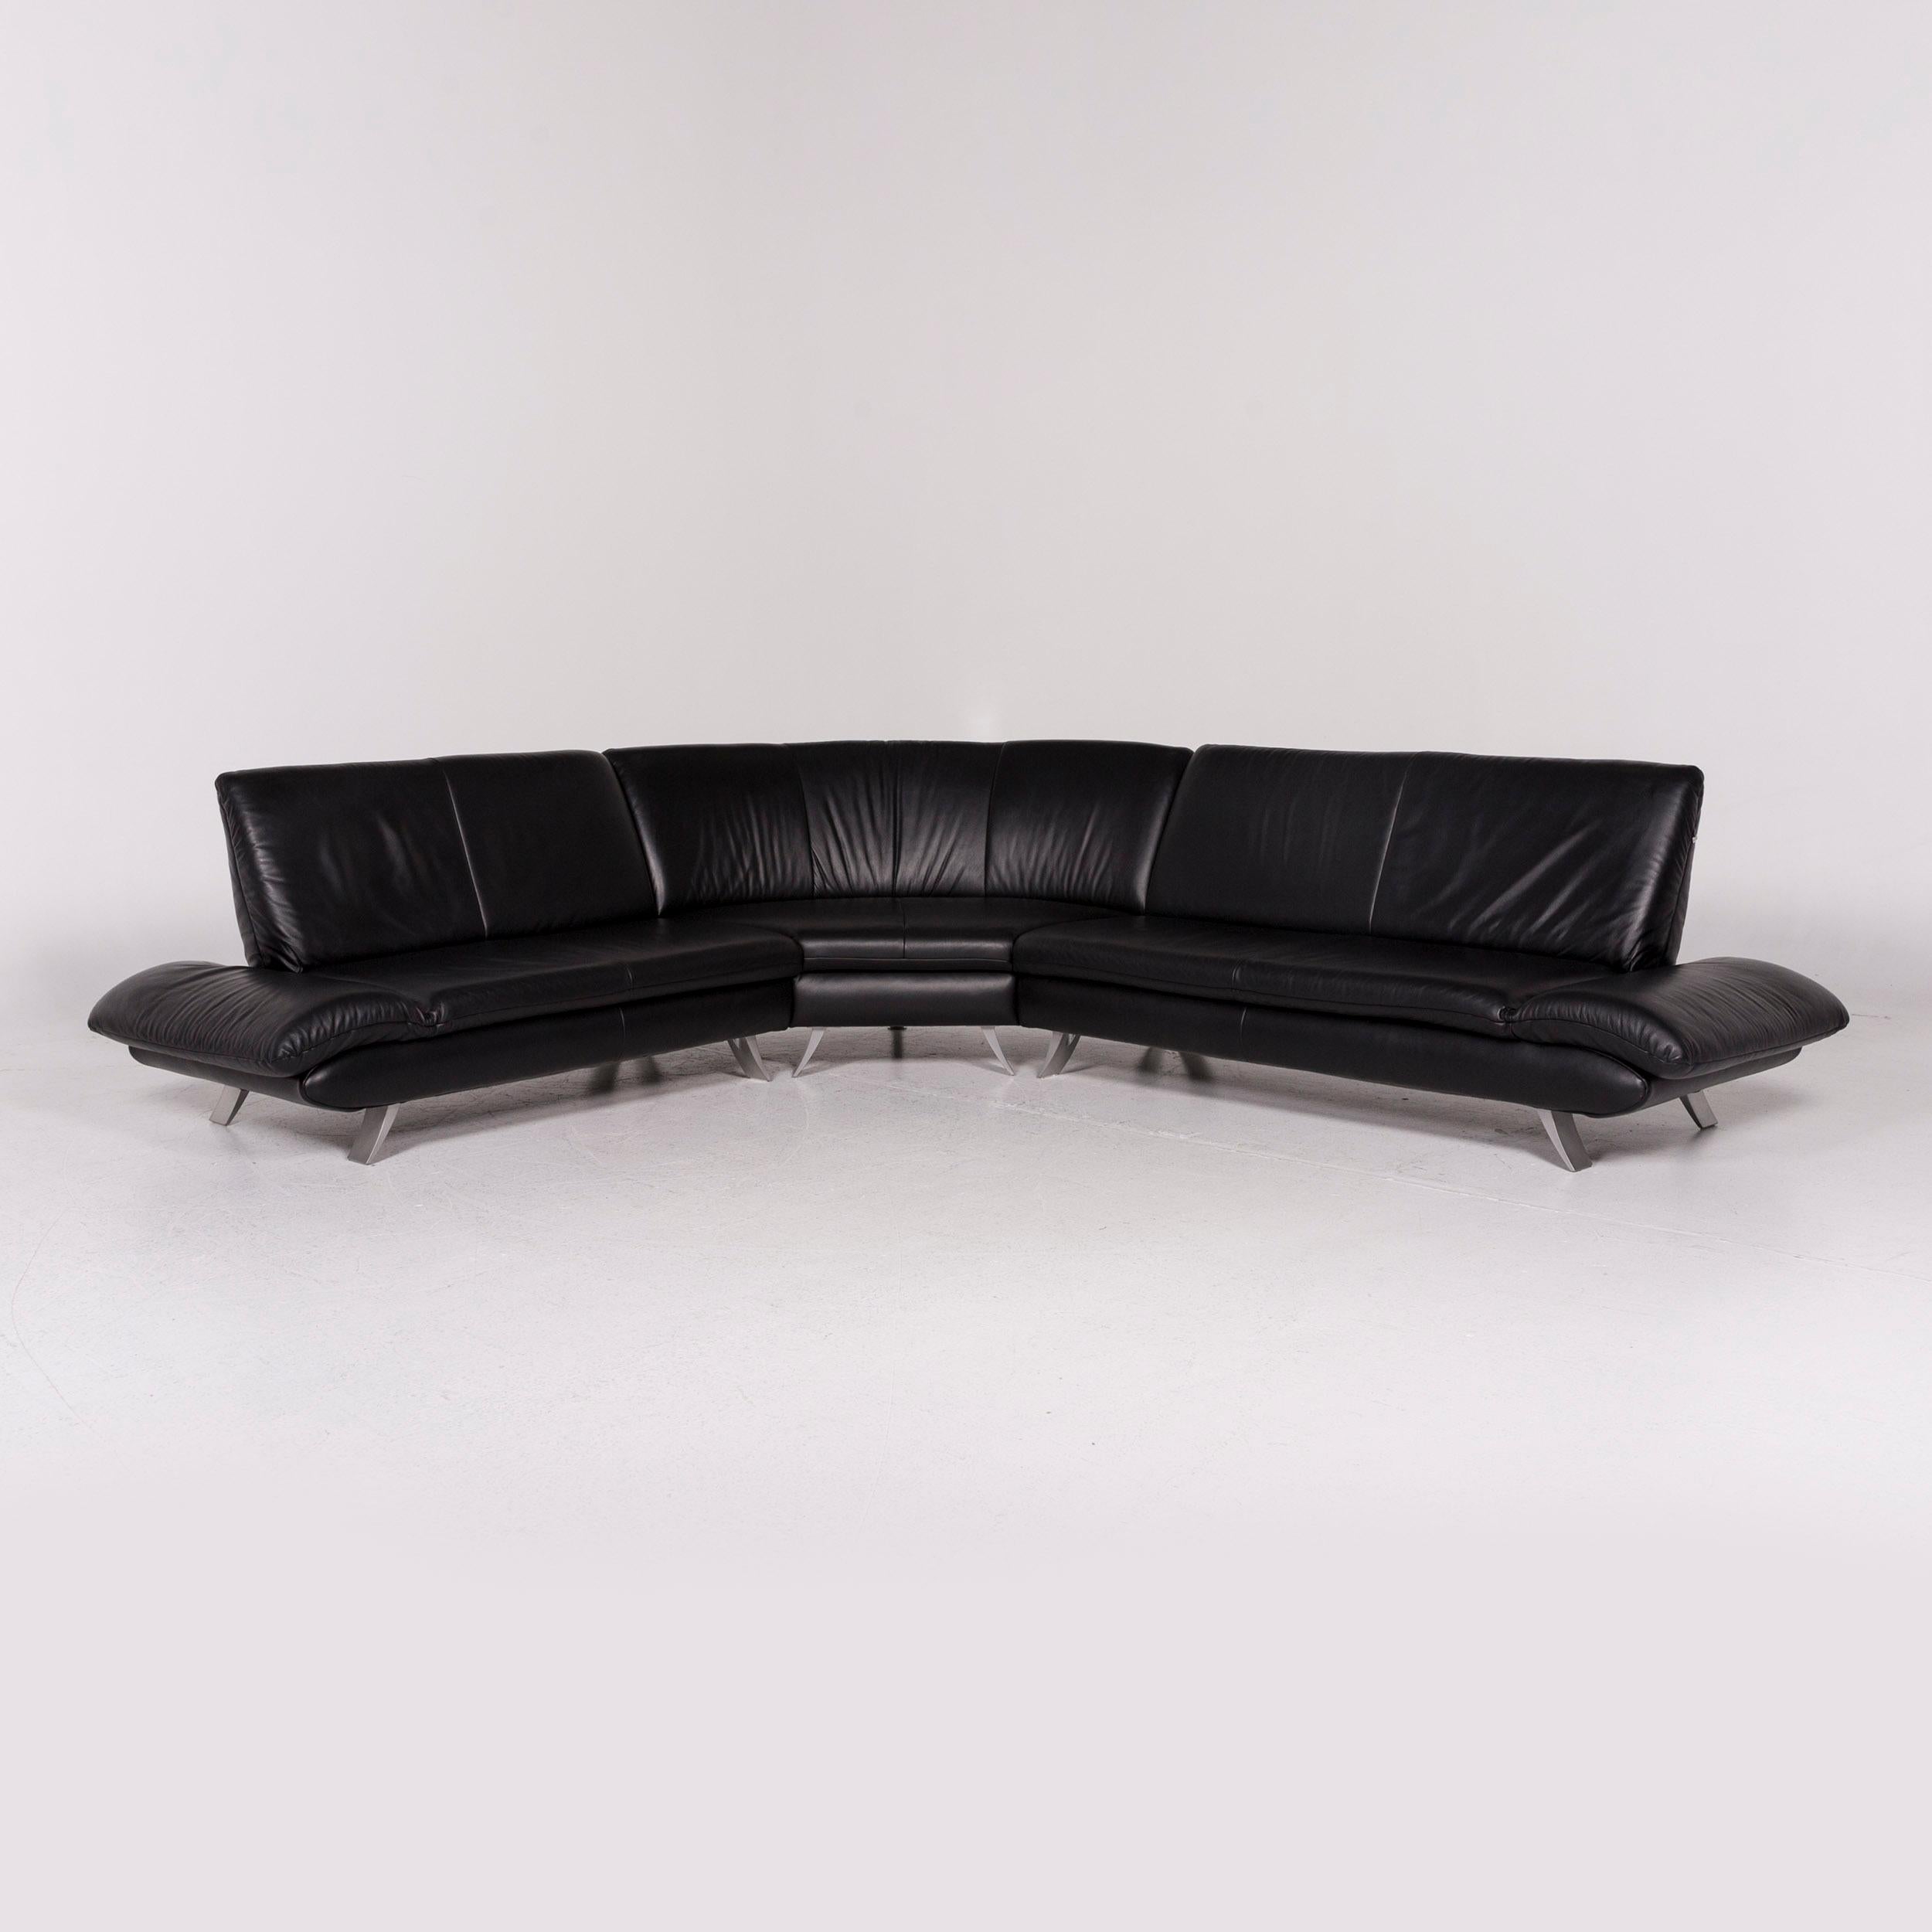 We bring to you a Koinor Rossini leather corner sofa black sofa couch.


 Product measurements in centimeters:
 

 Depth 85
Width 275
Height 84
Seat-height 39
Rest-height 40
Seat-depth 56
Seat-width 191
Back-height 42.
  